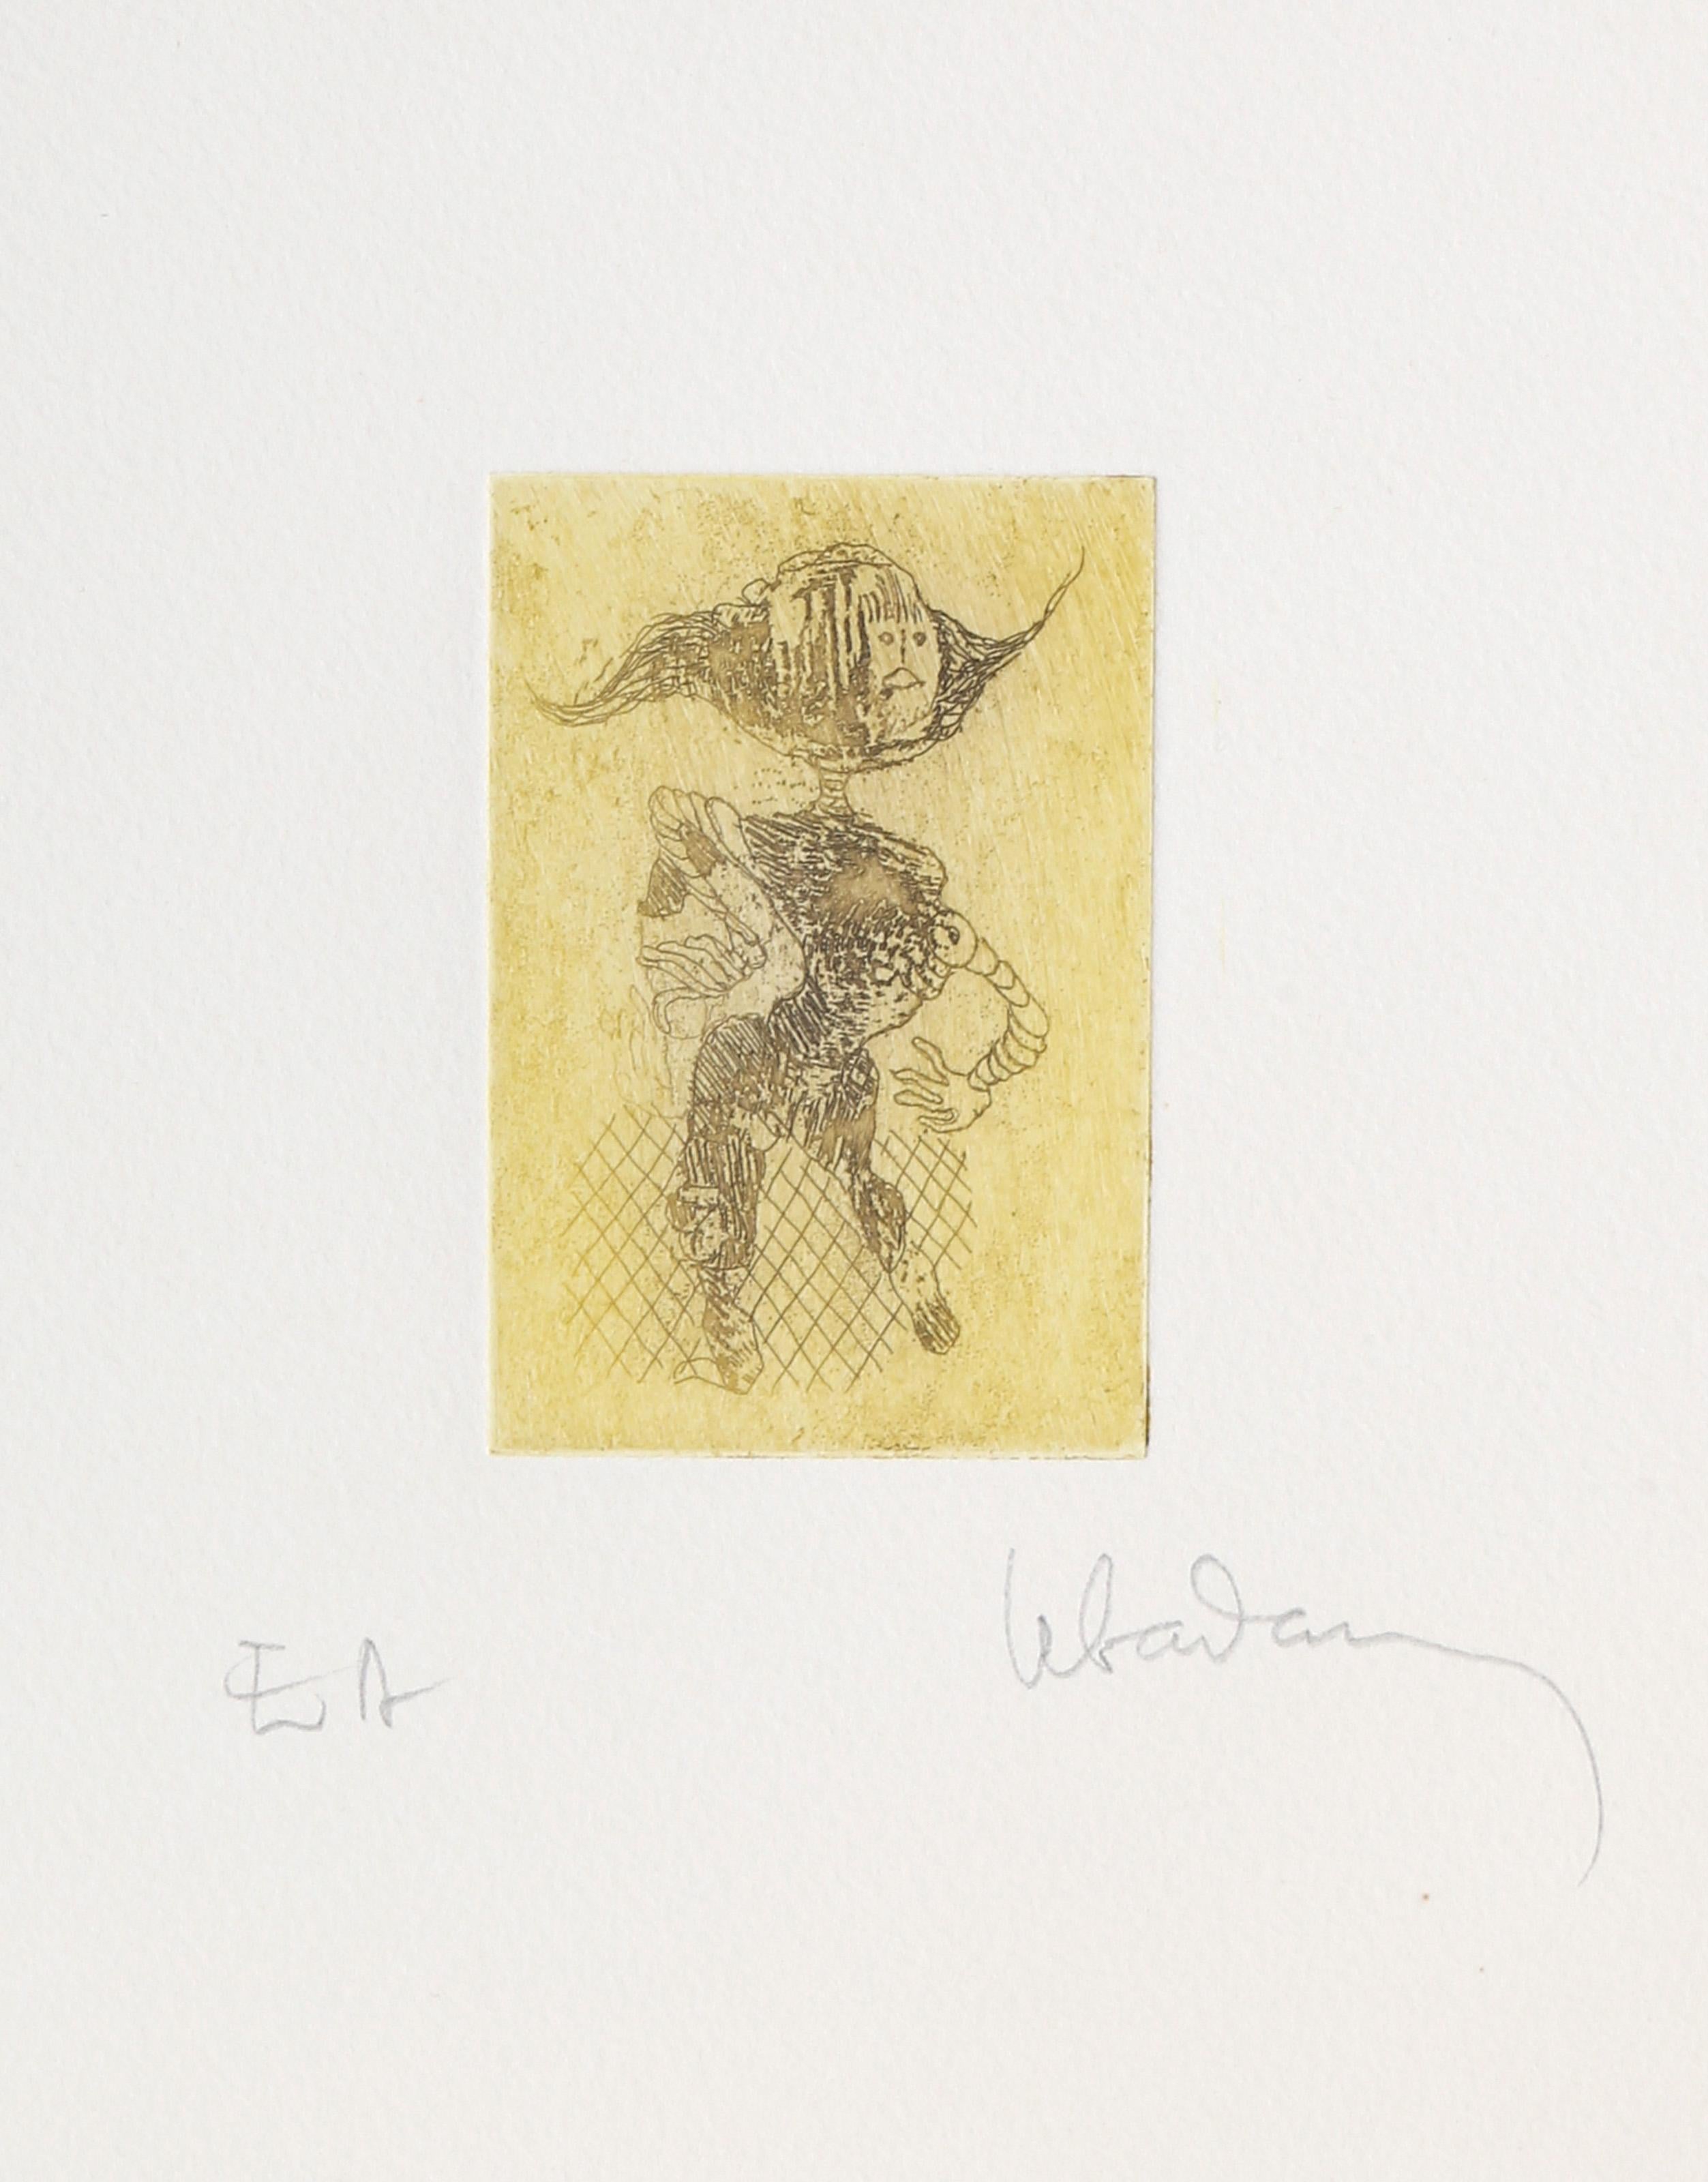 Lebadang (aka Hoi), Vietnamese (1922 - 2015) -  Standing Woman. Year: circa 1982, Medium: Etching with Relief, signed in pencil, Edition: EA, Size: 10 x 9 in. (25.4 x 22.86 cm) 